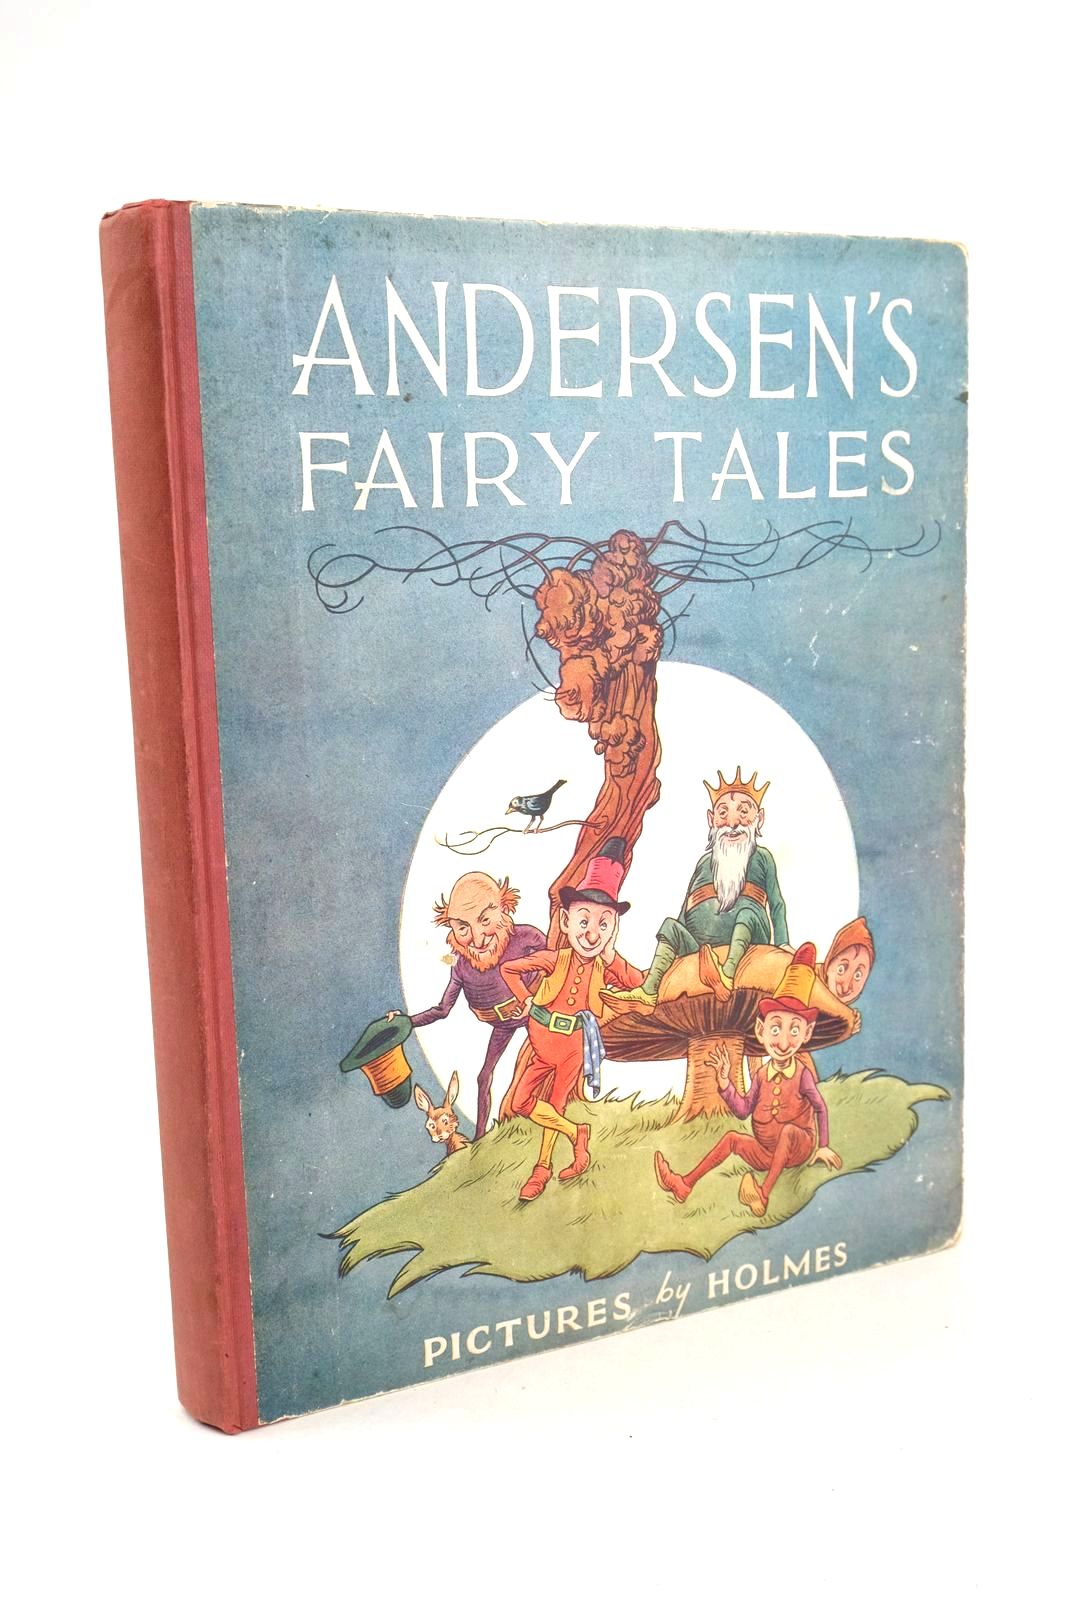 Photo of HANS ANDERSEN'S FAIRY TALES written by Andersen, Hans Christian illustrated by Holmes,  published by Collins Clear-Type Press (STOCK CODE: 1325900)  for sale by Stella & Rose's Books